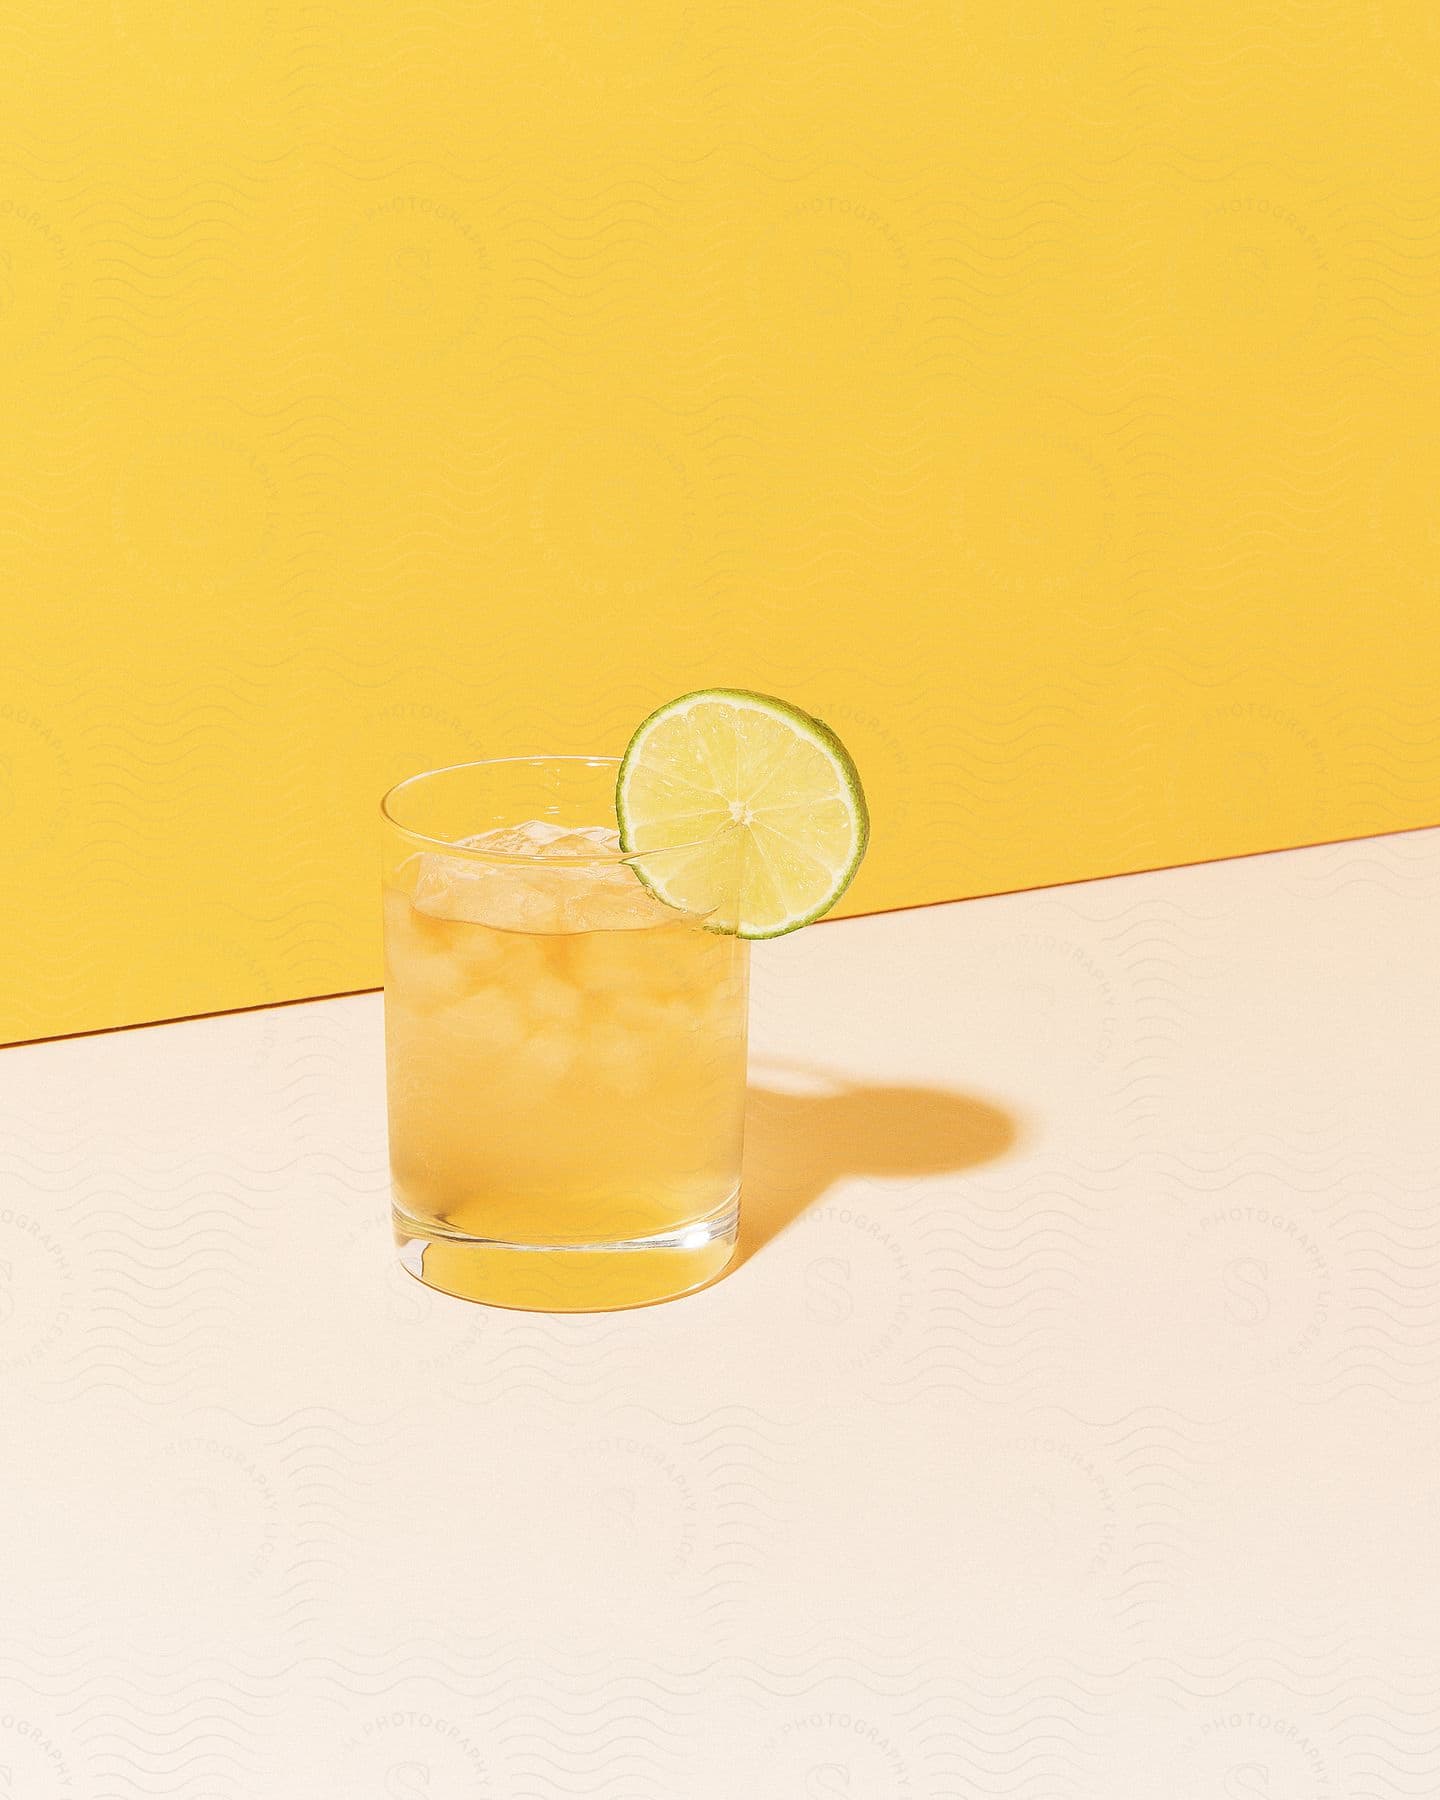 iced yellow beverage served on a glass with a slice of lime over a white table next to a yellow wall